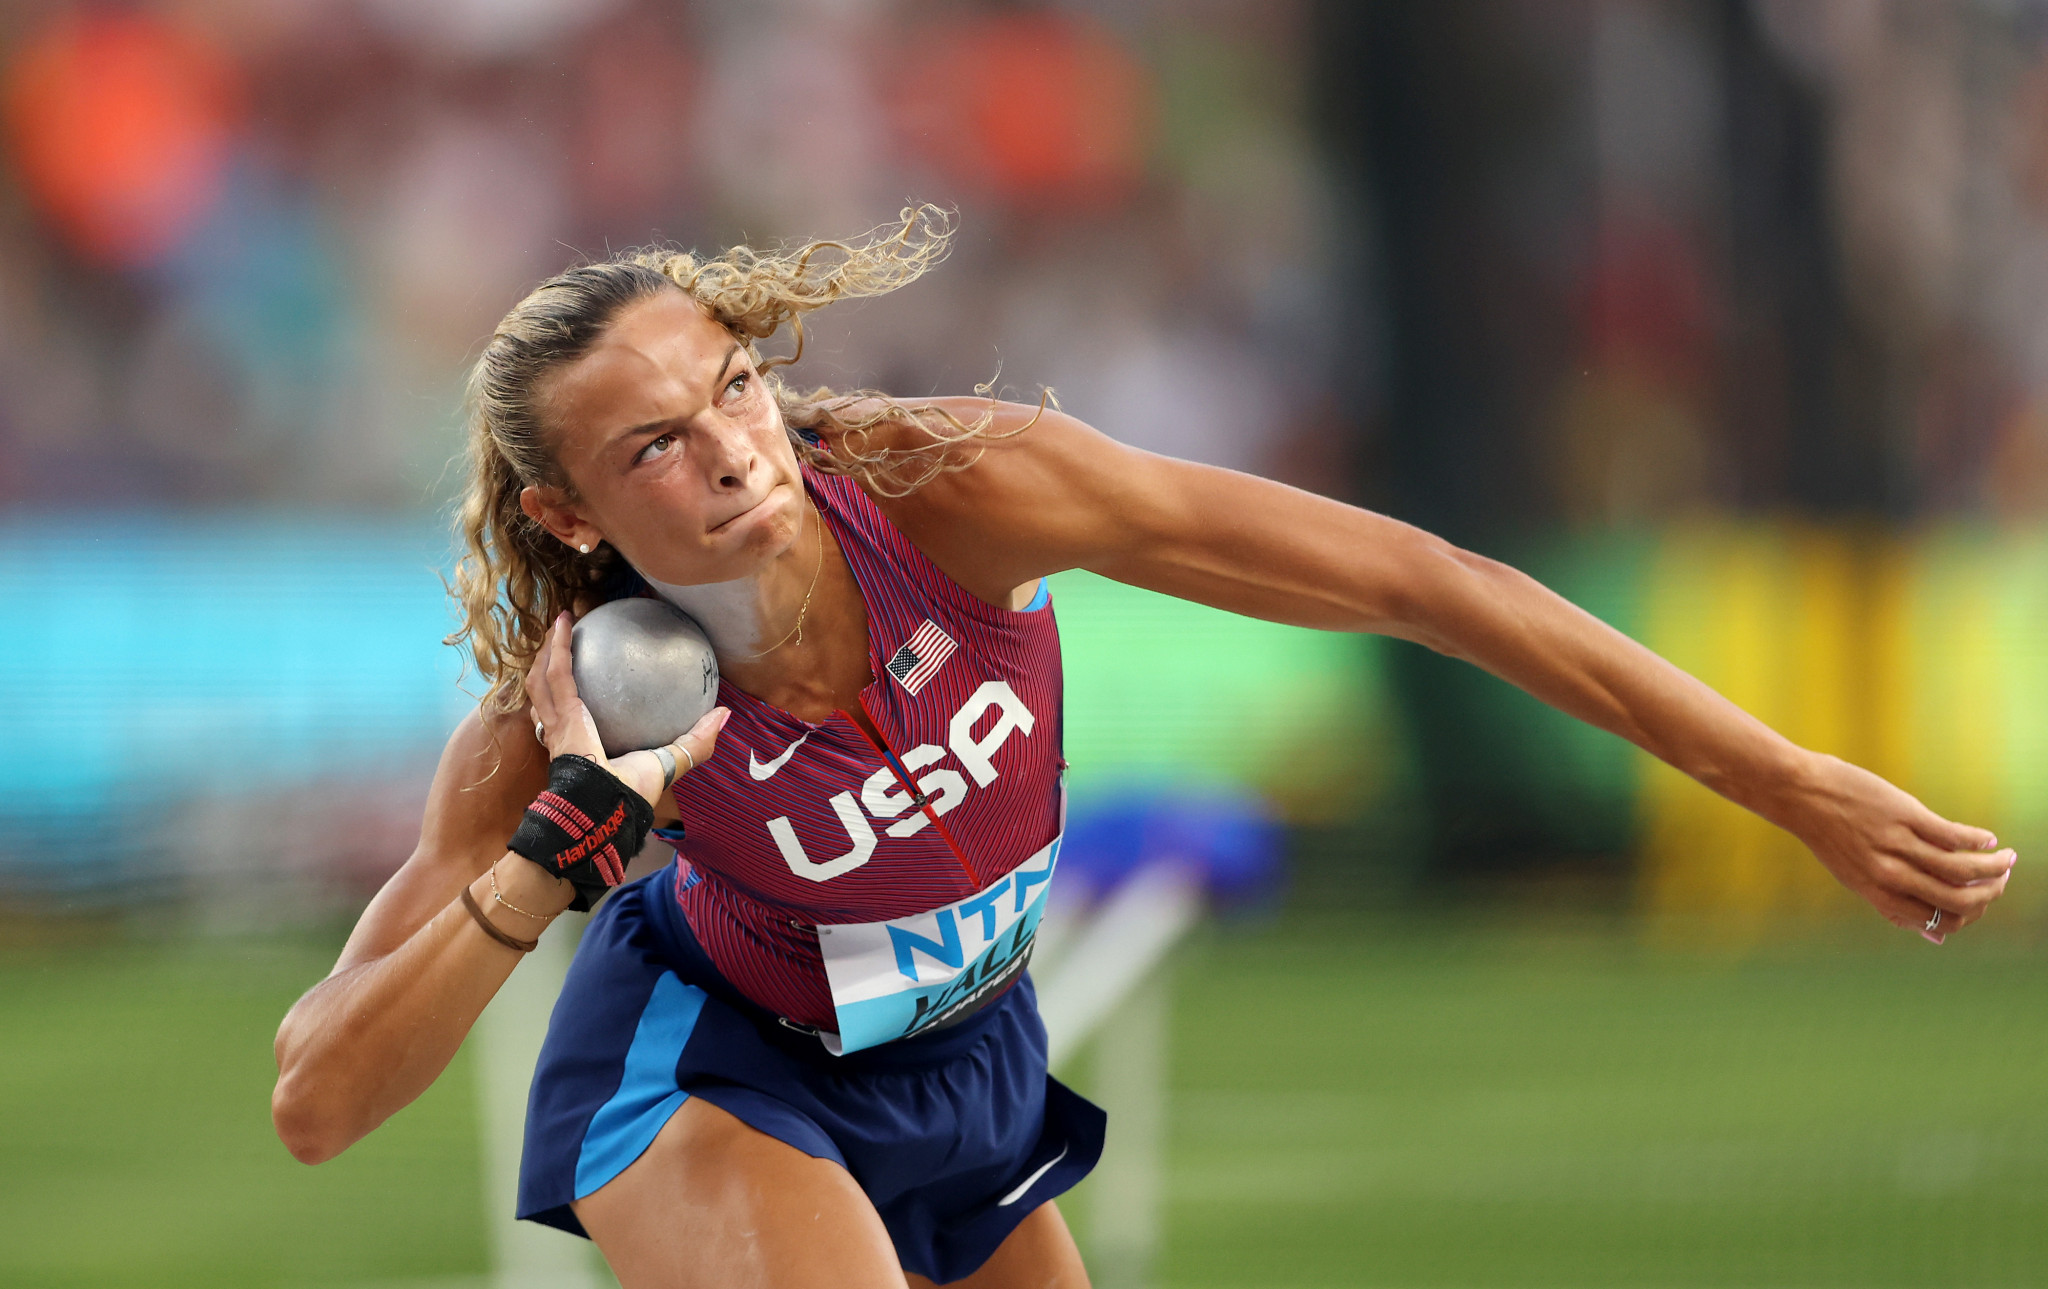 The US' Anna Hall leads the heptathlon after four events ©Getty Images